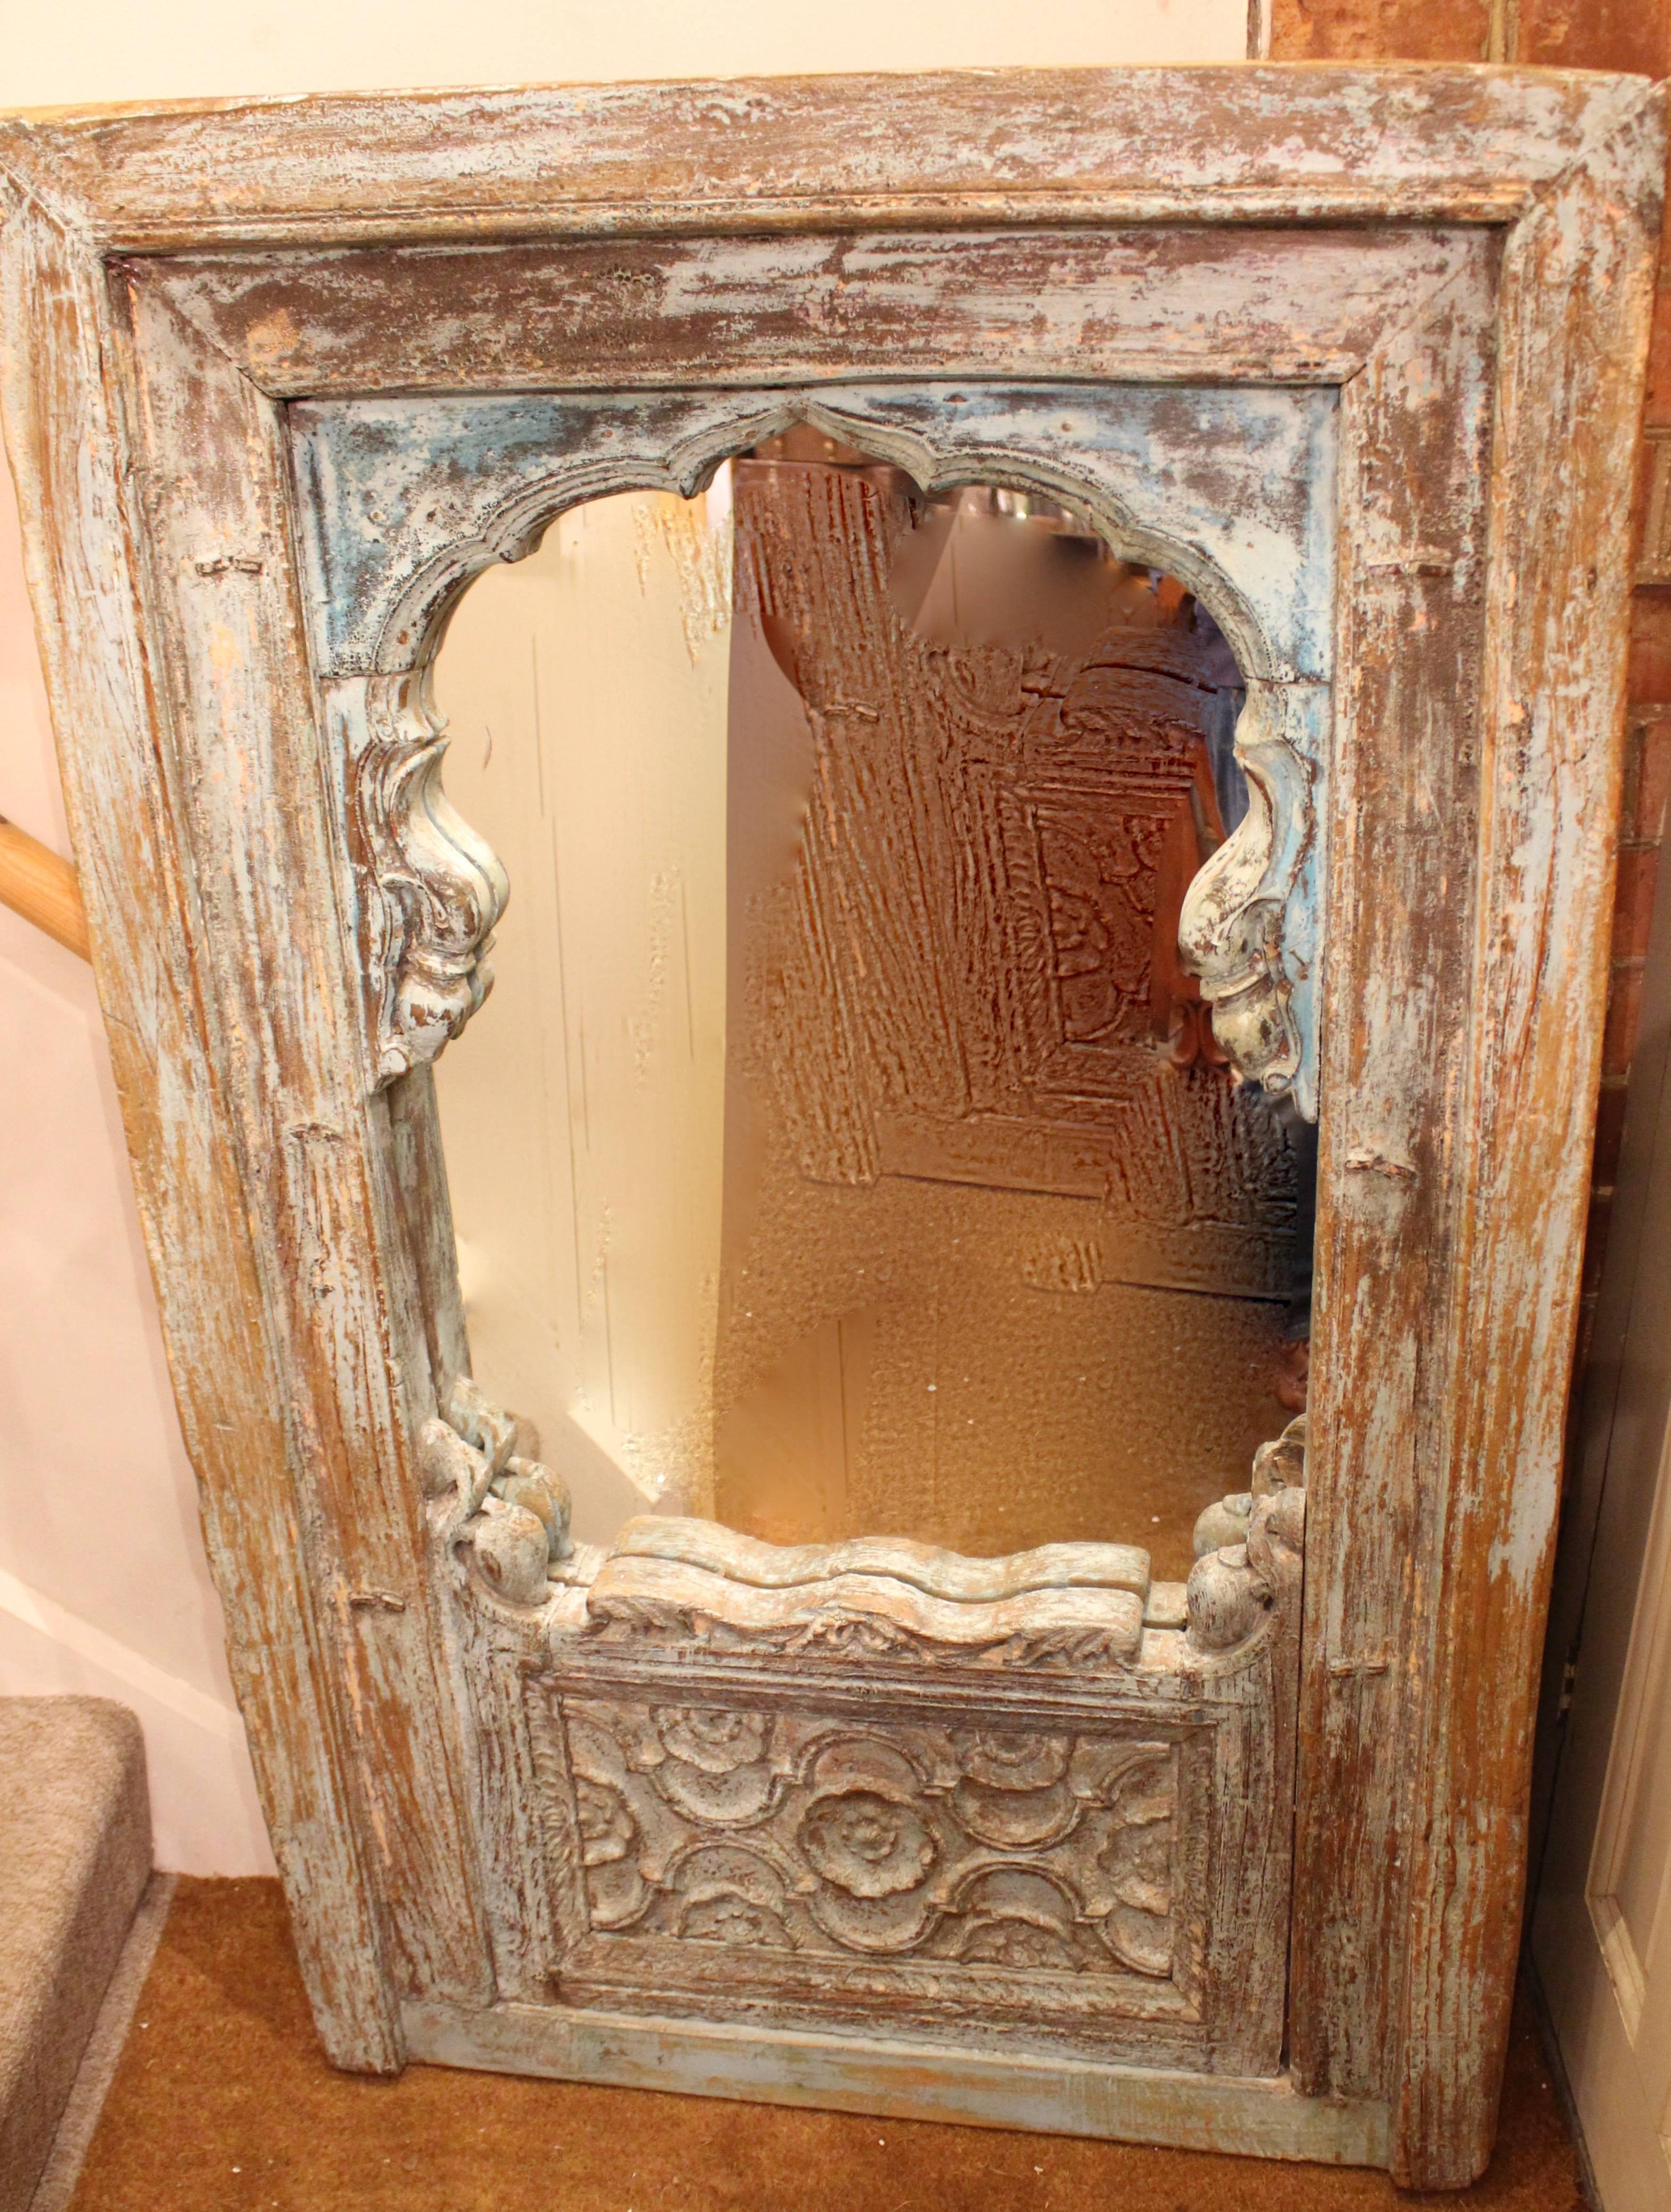 A beautiful hully decorative Colonial Indian Hardwood Painted Balcony Mirror. Painted in a delightful pastel colour and having an attractive distressed finish. Would look perfect in a modern or traditional setting. Please browse our other Indian